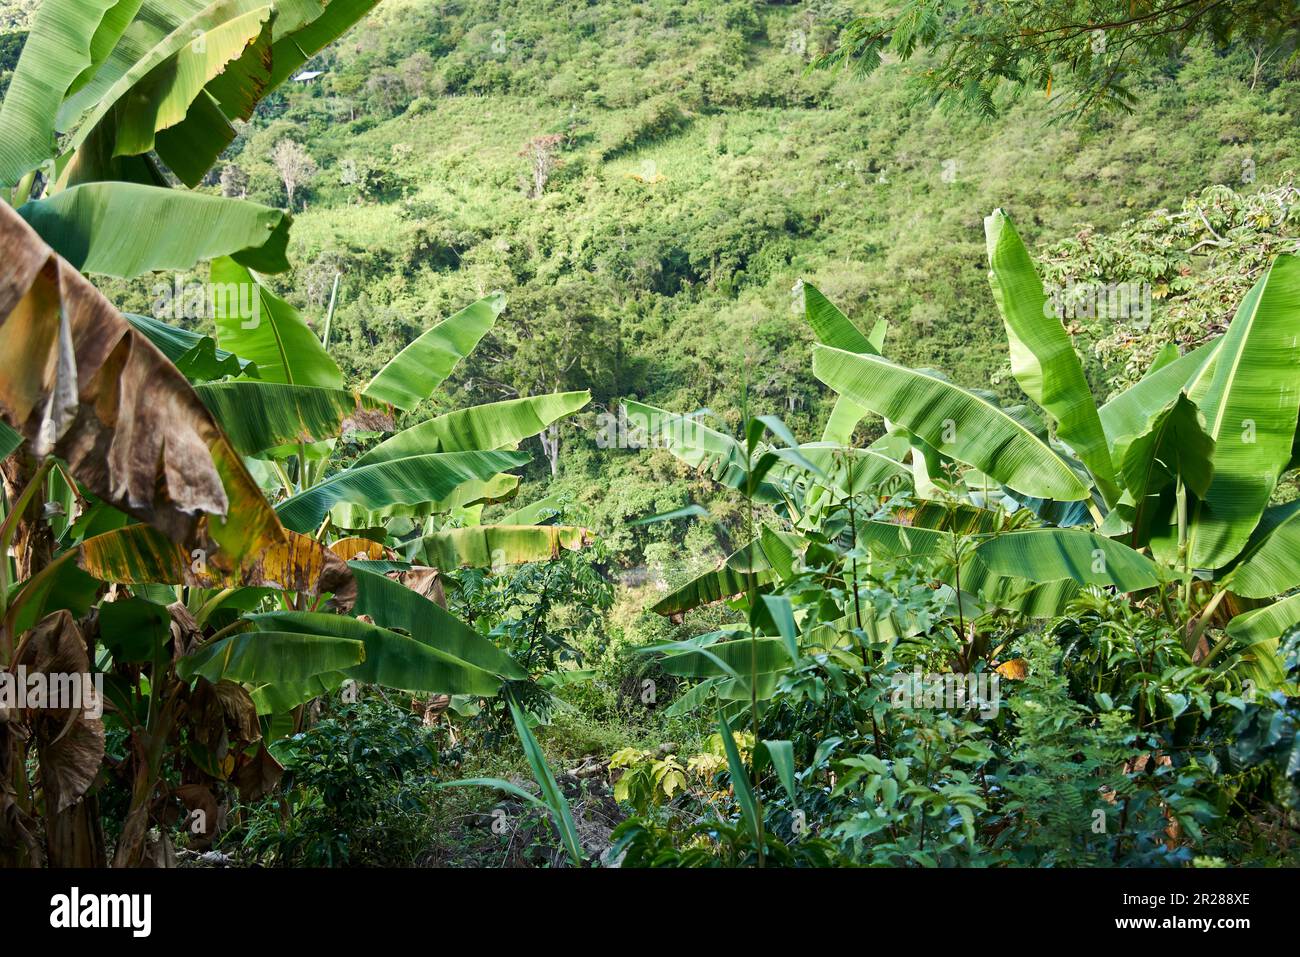 Rural landscape with coffee cultivation and banana palm production near Aratoca in Santander, Colombia. Stock Photo